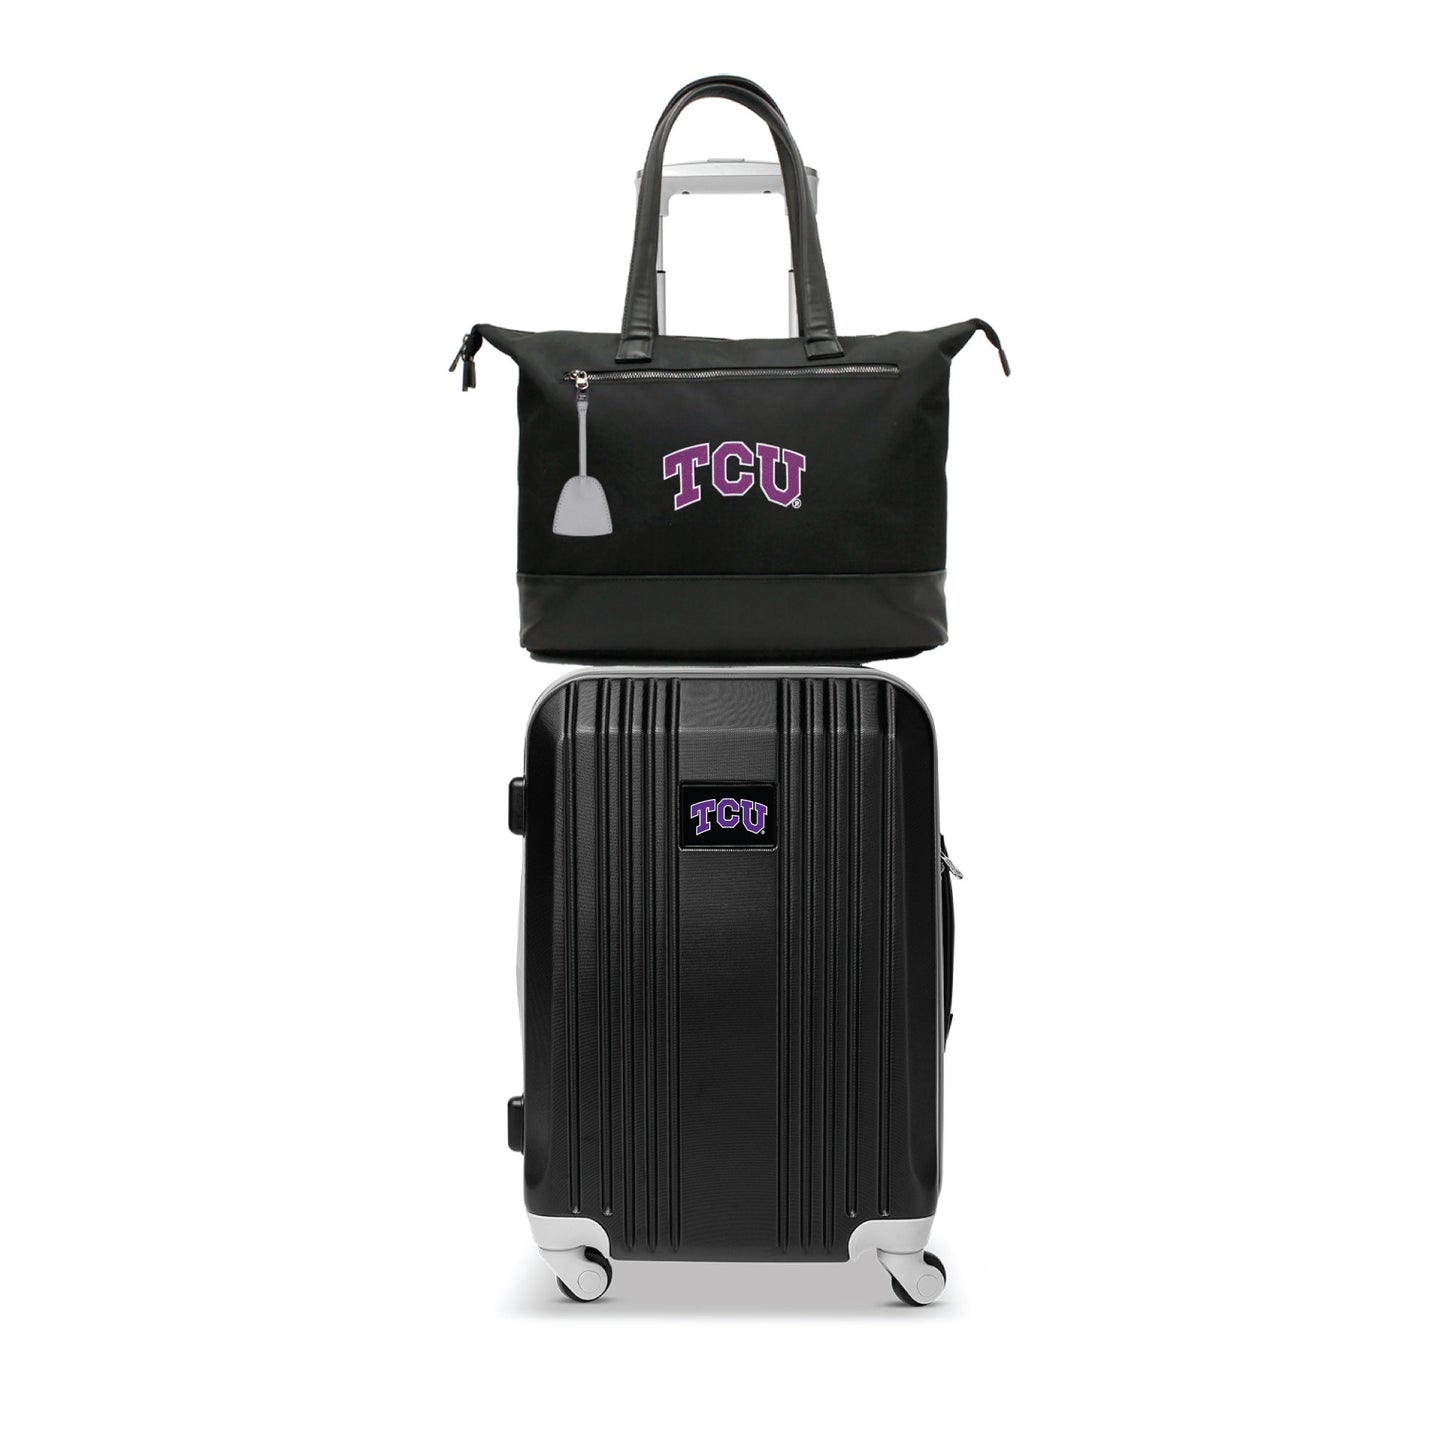 Texas Christian University Horned Frogs Premium Laptop Tote Bag and Luggage Set